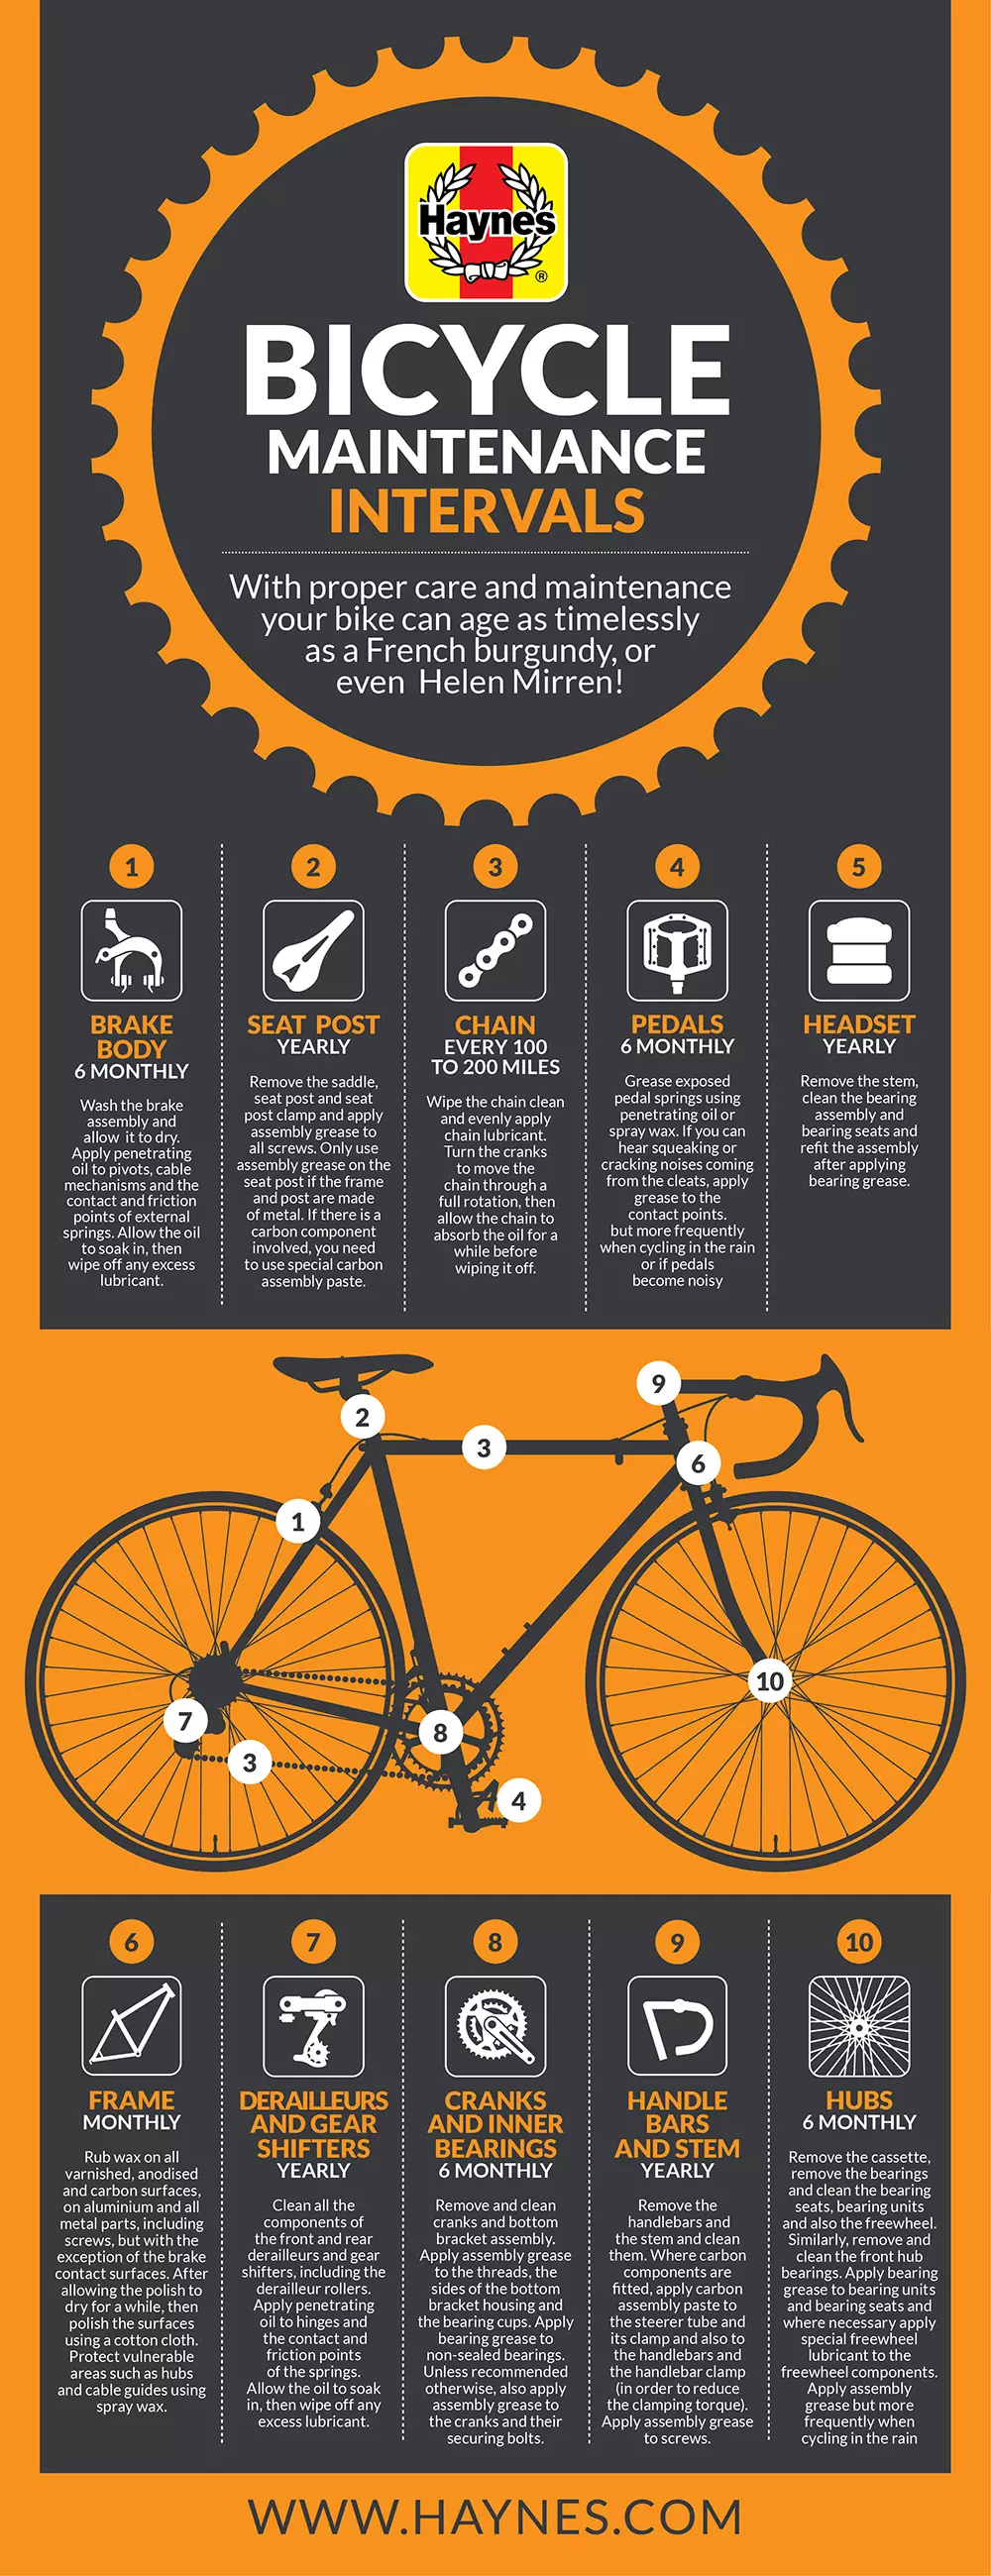 Simple bike maintenance intervals for keeping your ride timeless infographic